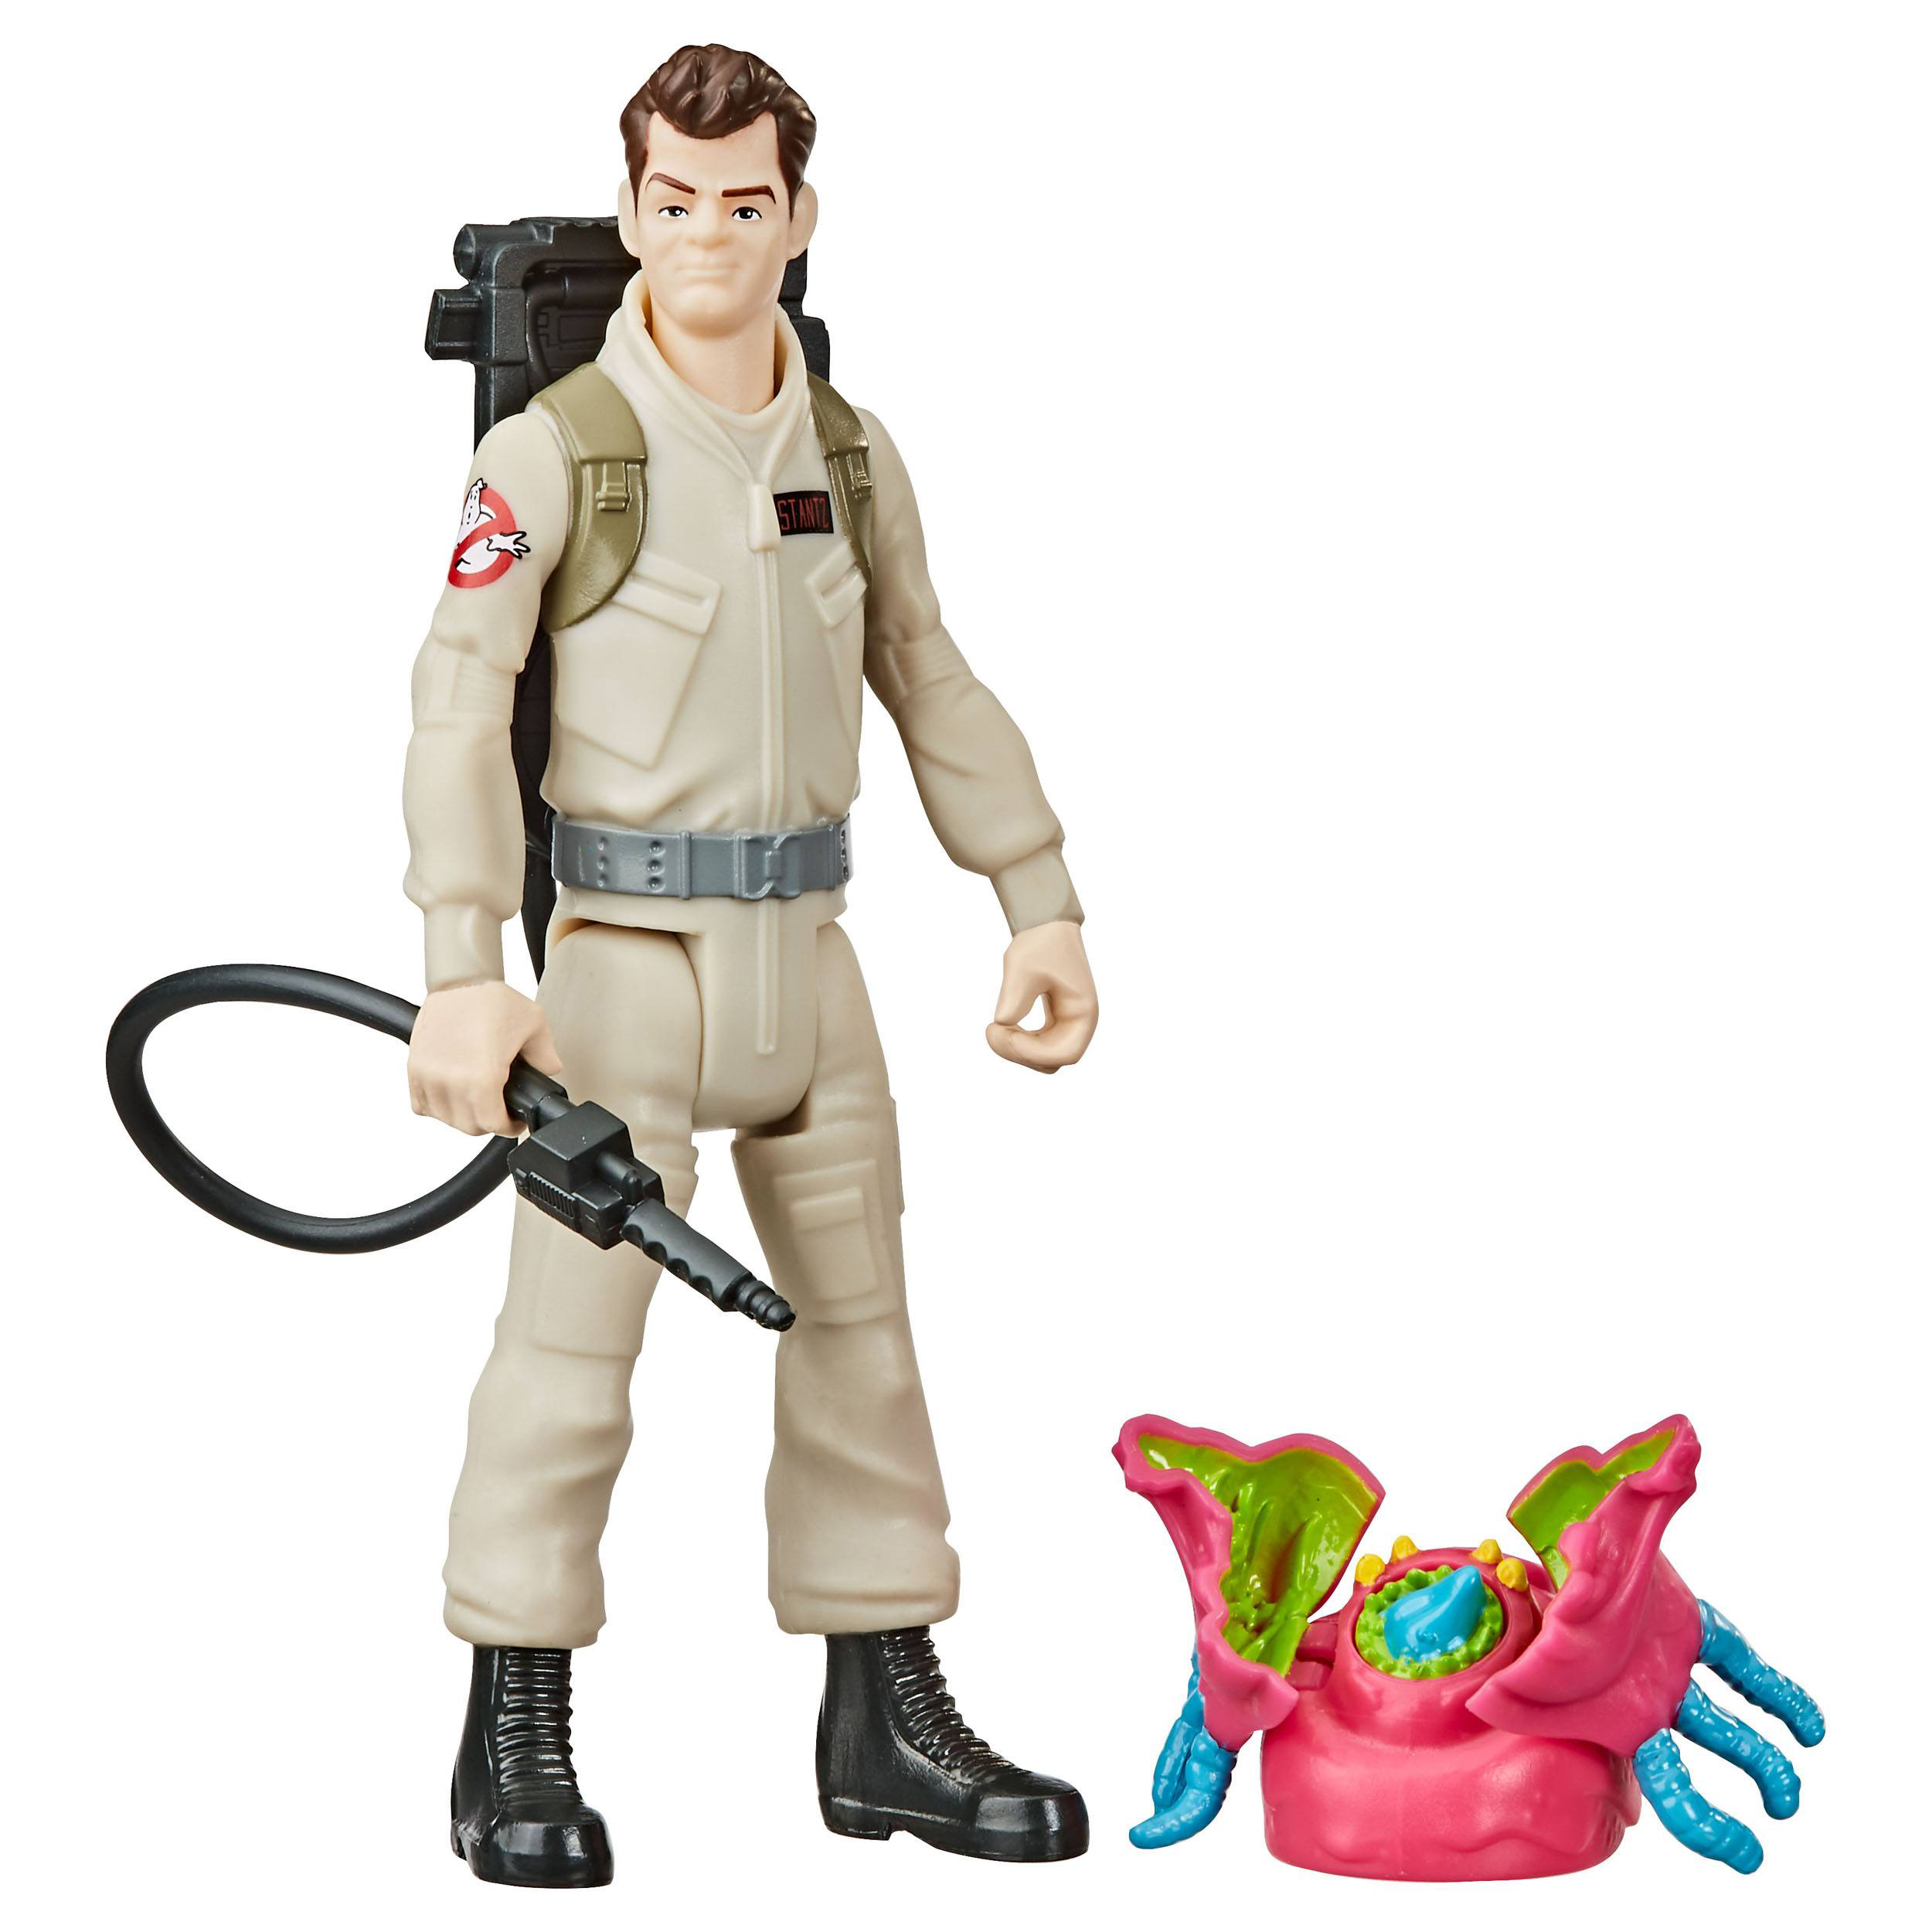 HASBRO Ghostbusters Geisterschreck | Fright Feature F9765 Actionfigur Action cm Ray Stantz 13 Figur